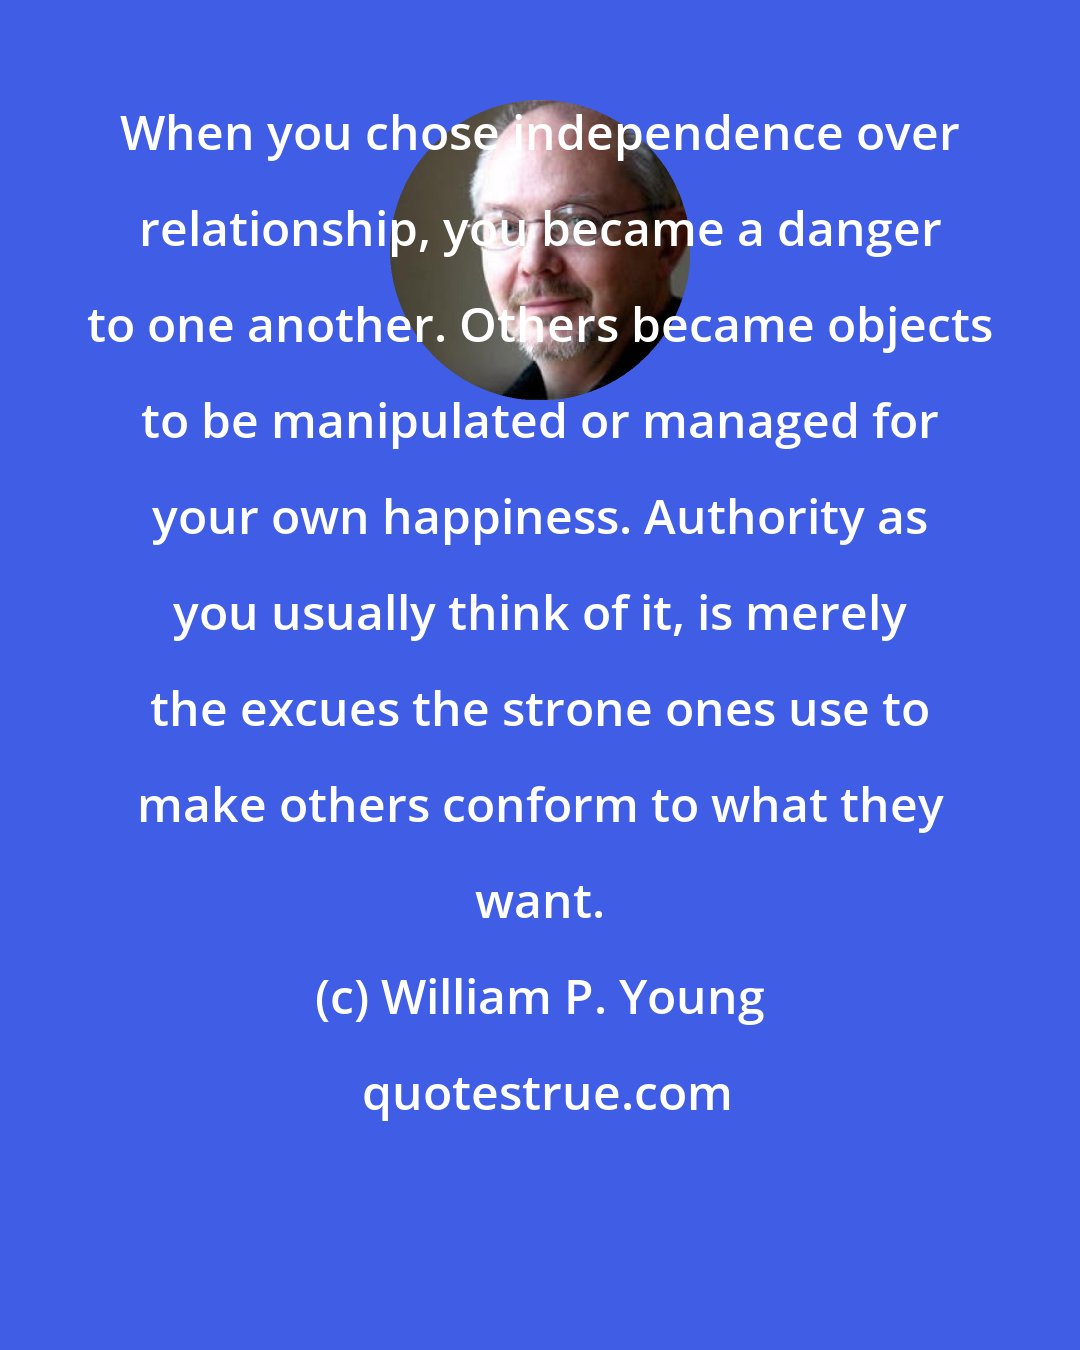 William P. Young: When you chose independence over relationship, you became a danger to one another. Others became objects to be manipulated or managed for your own happiness. Authority as you usually think of it, is merely the excues the strone ones use to make others conform to what they want.